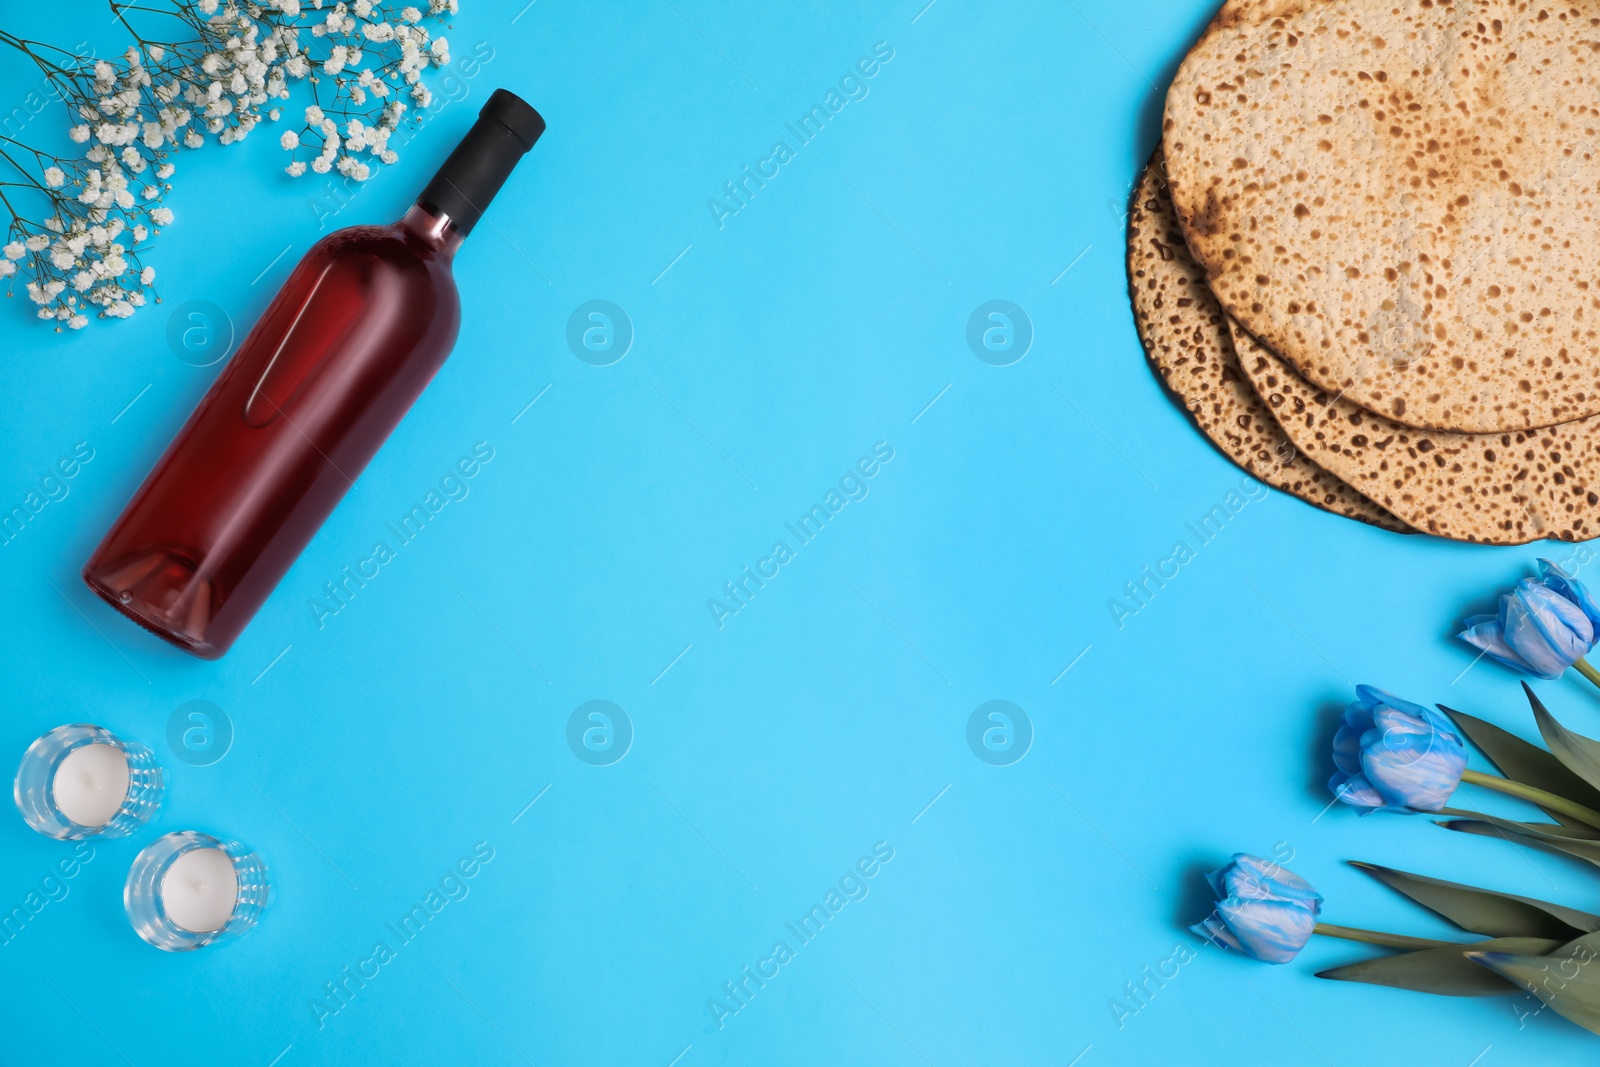 Photo of Flat lay composition with matzos on light blue background, space for text. Passover (Pesach) celebration